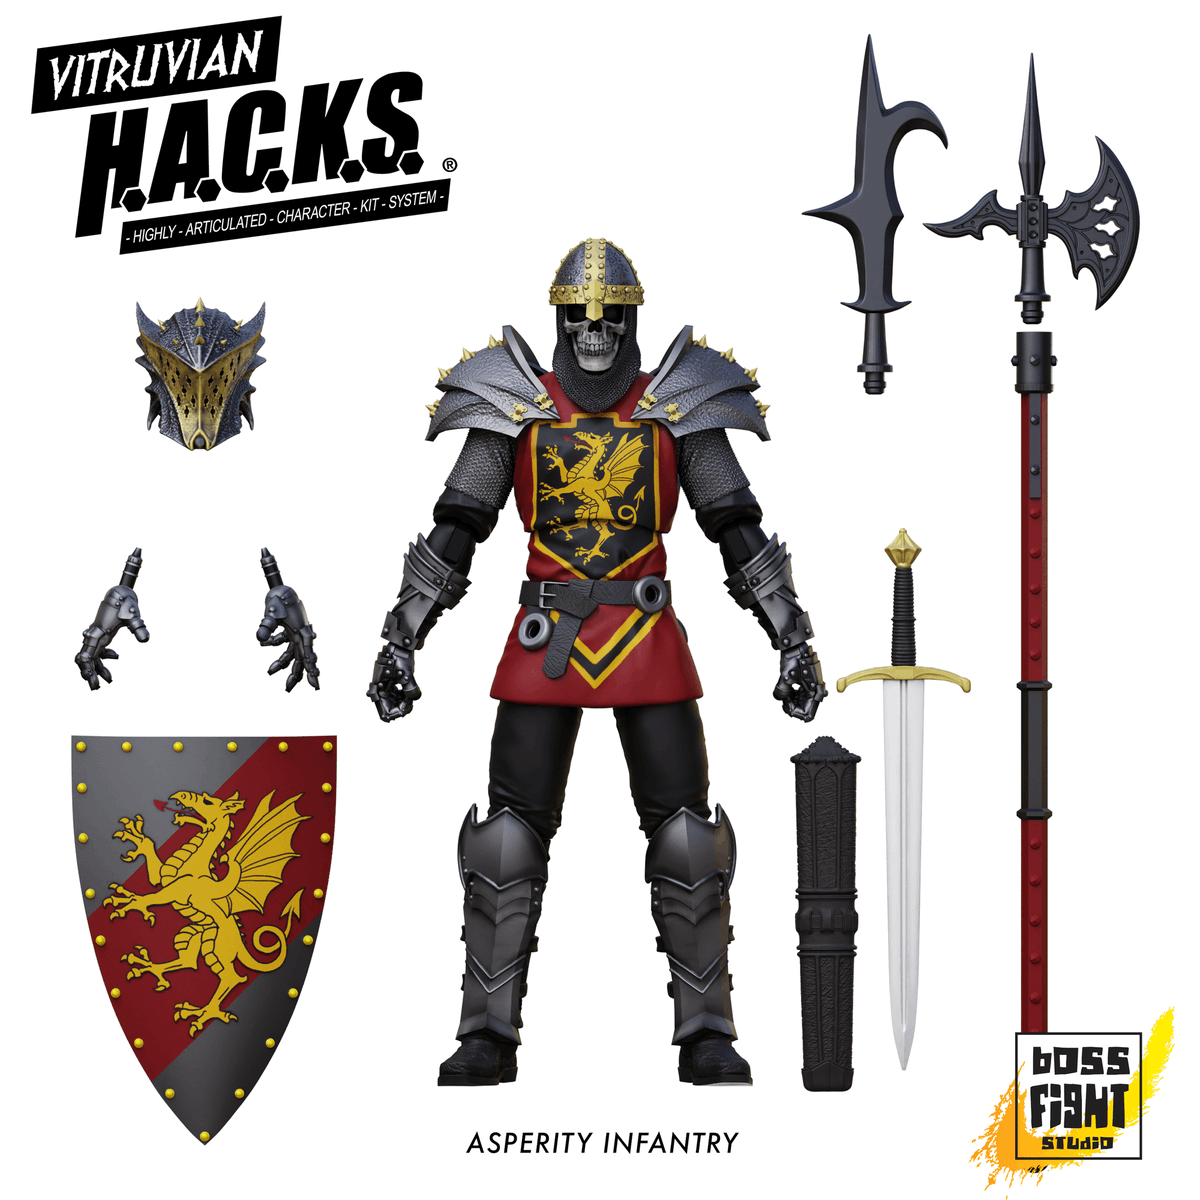 A LIMITED RUN of the exclusive new HACKS Knights is available for preorder NOW on Bigbadtoystore.com! Three new warriors - Ascension Frontline, Ascension Bowman and Asperity Infantry only available here: tinyurl.com/4bdspv8y